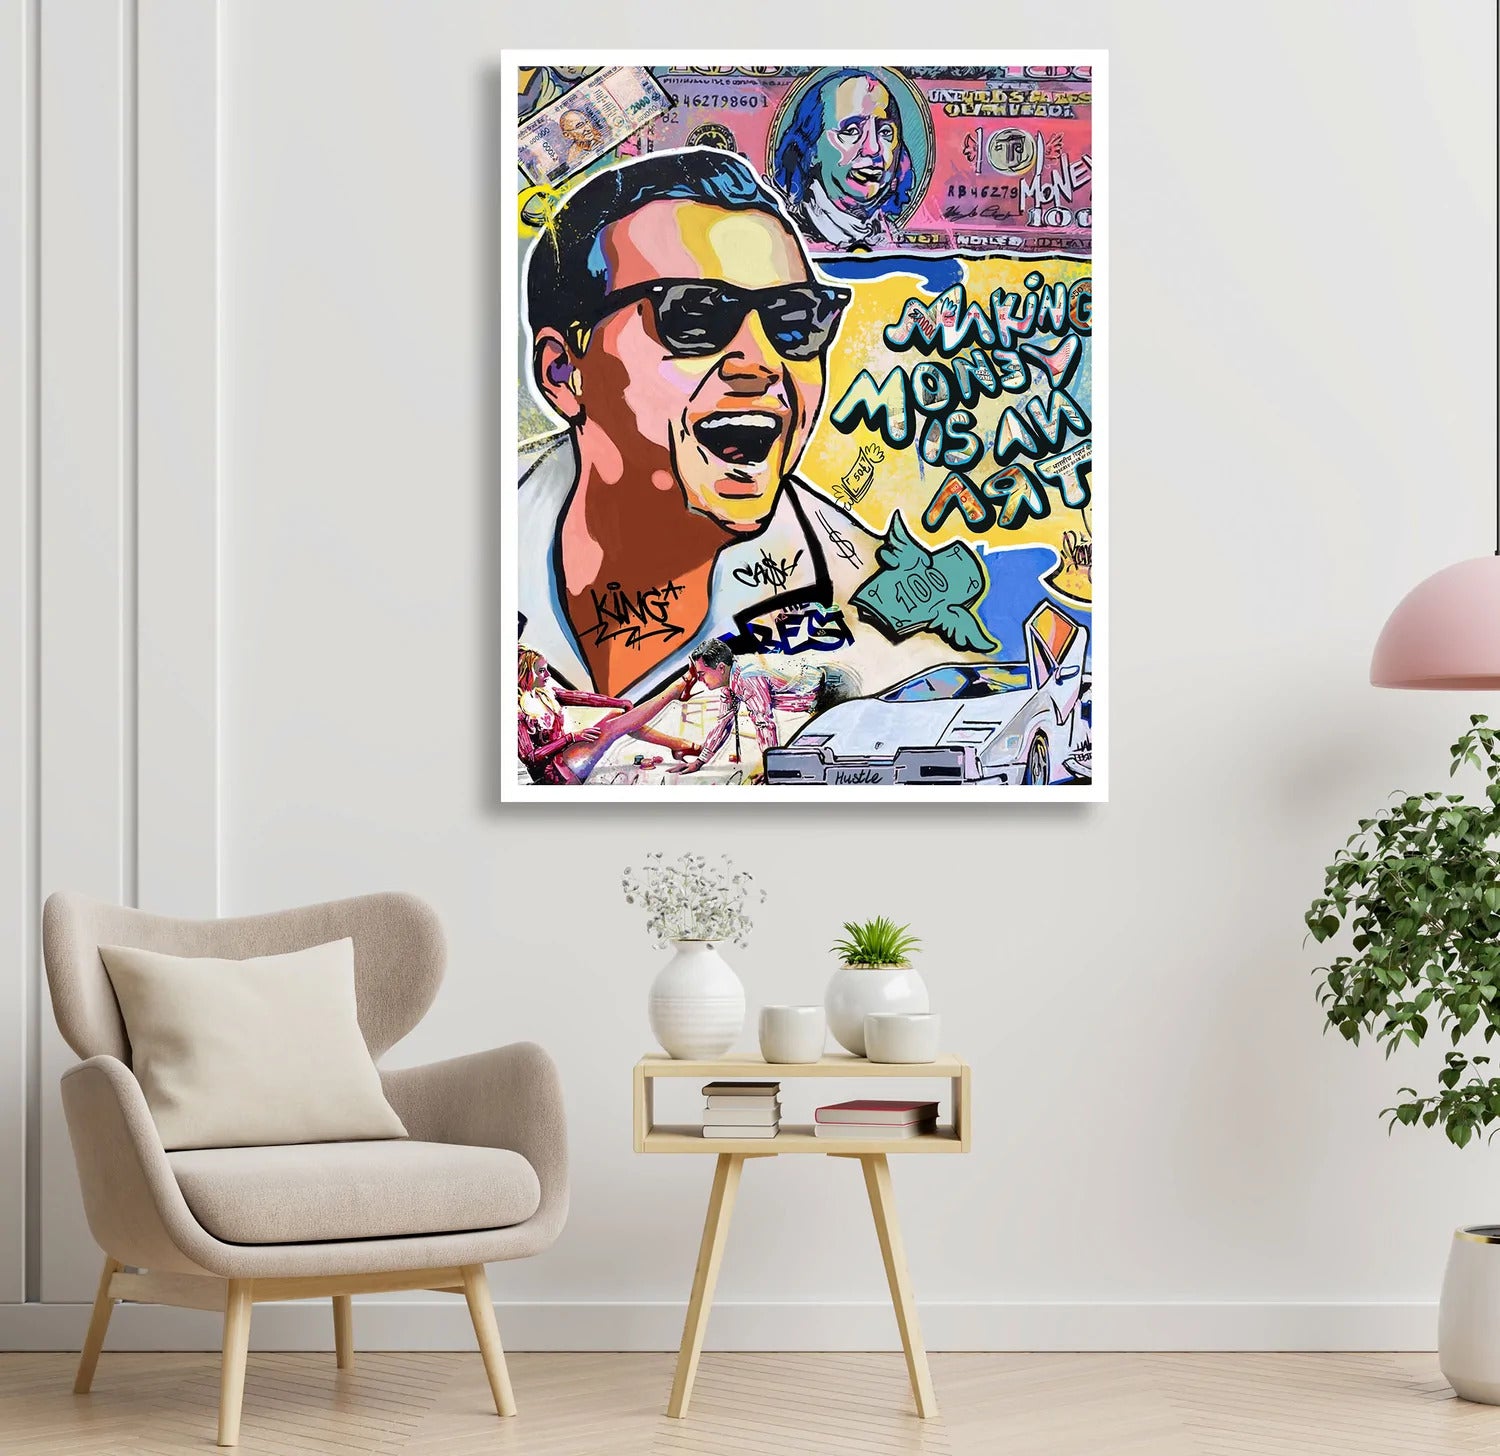 Why canvas wall art is a Smart and Innovative Addition to Your Collection